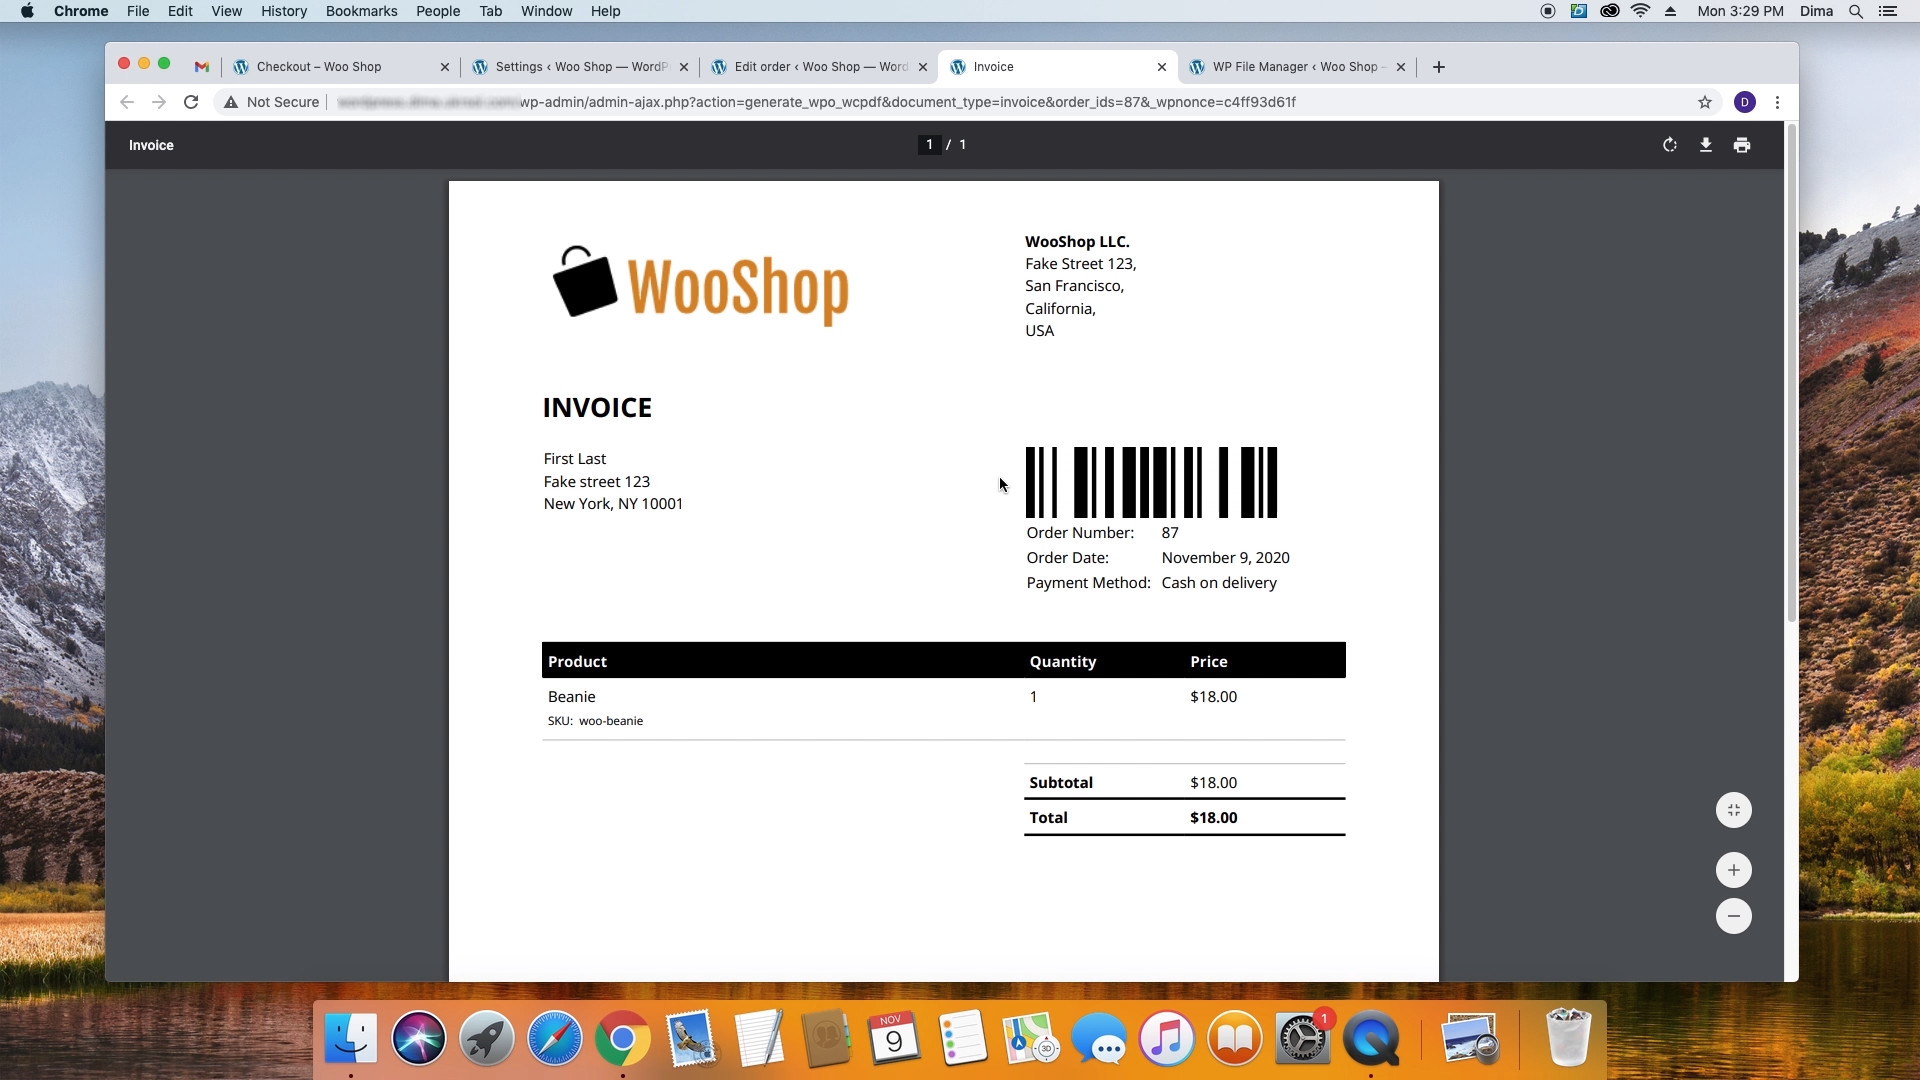 Display barcode in invoice